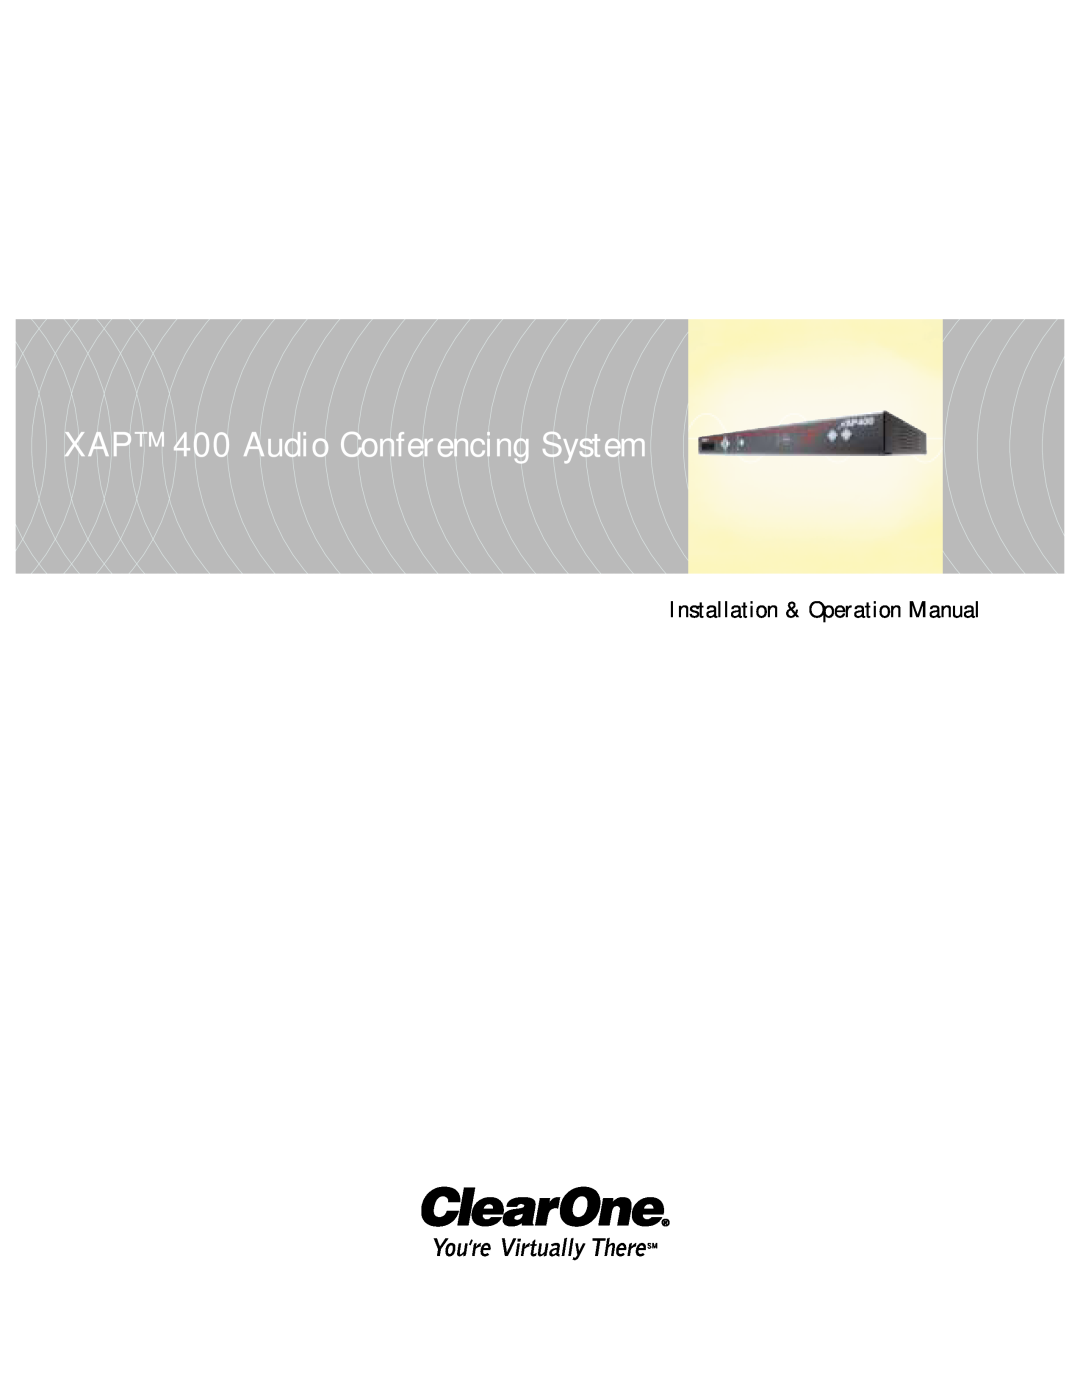 ClearOne comm operation manual XAP 400 Audio Conferencing System, Installation & Operation Manual 